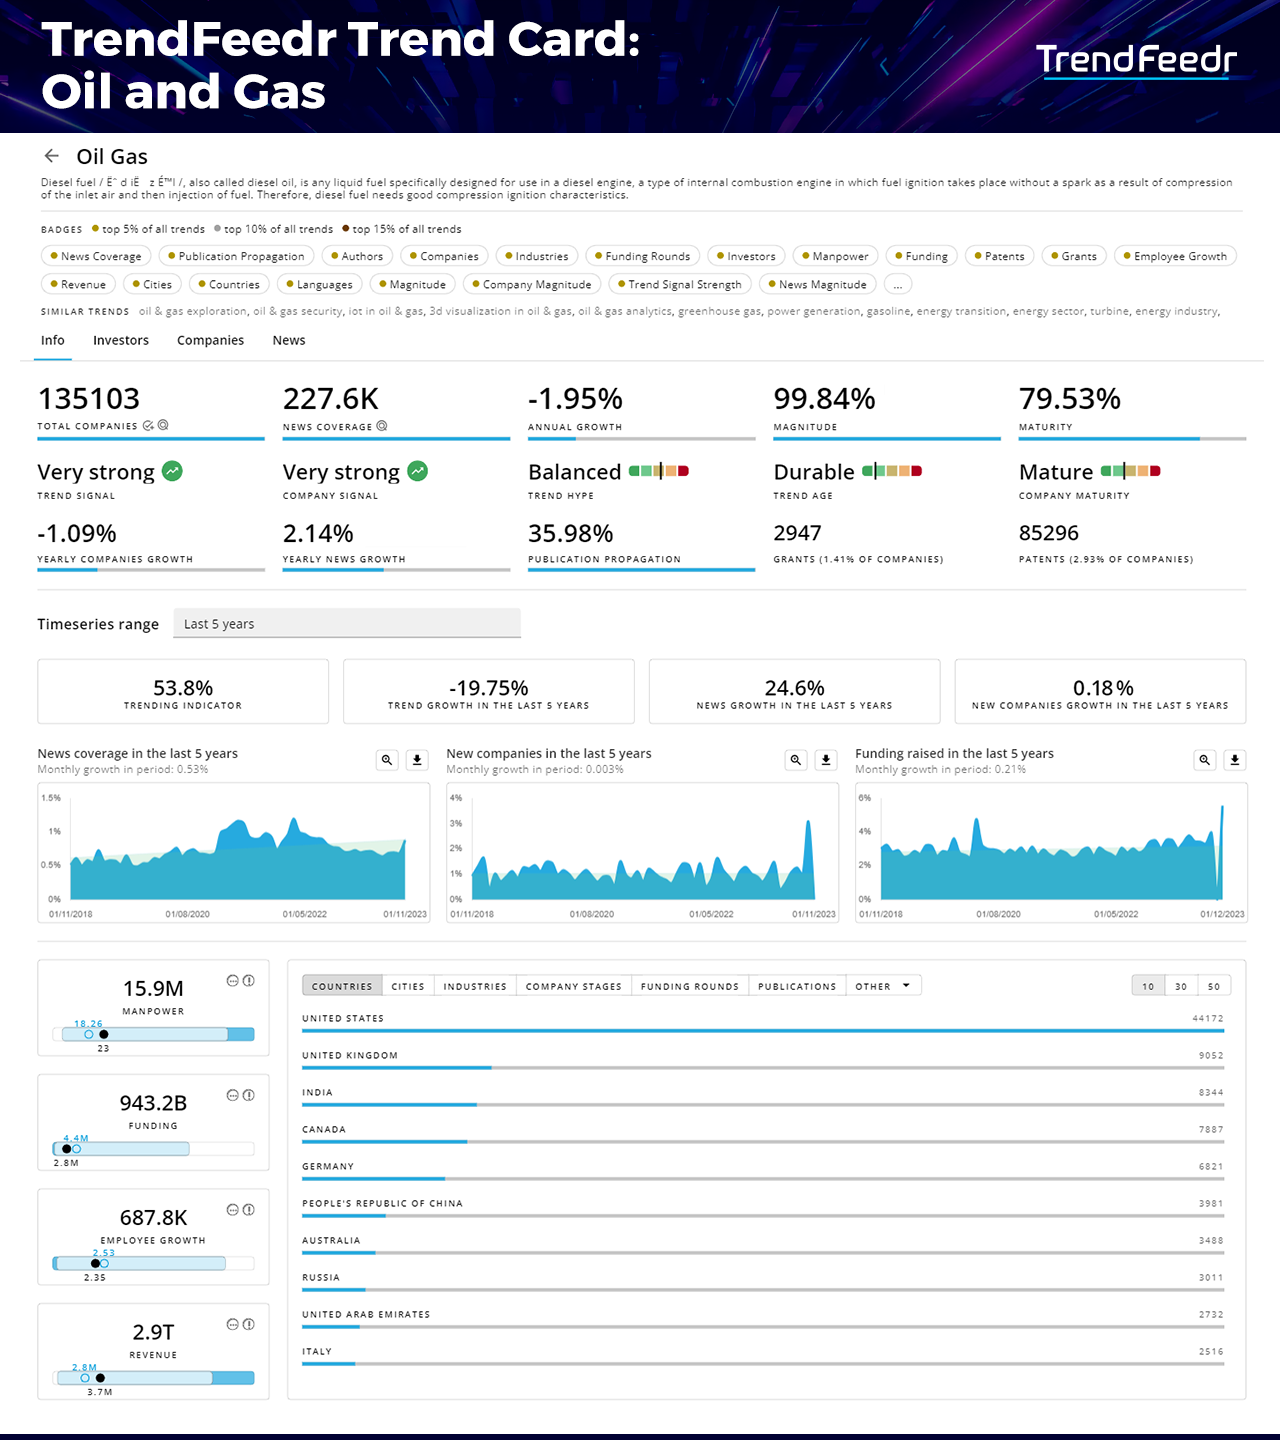 Oil-and-Gas-Industry-Trends-Report-TrendCard-TrendFeedr-noresize